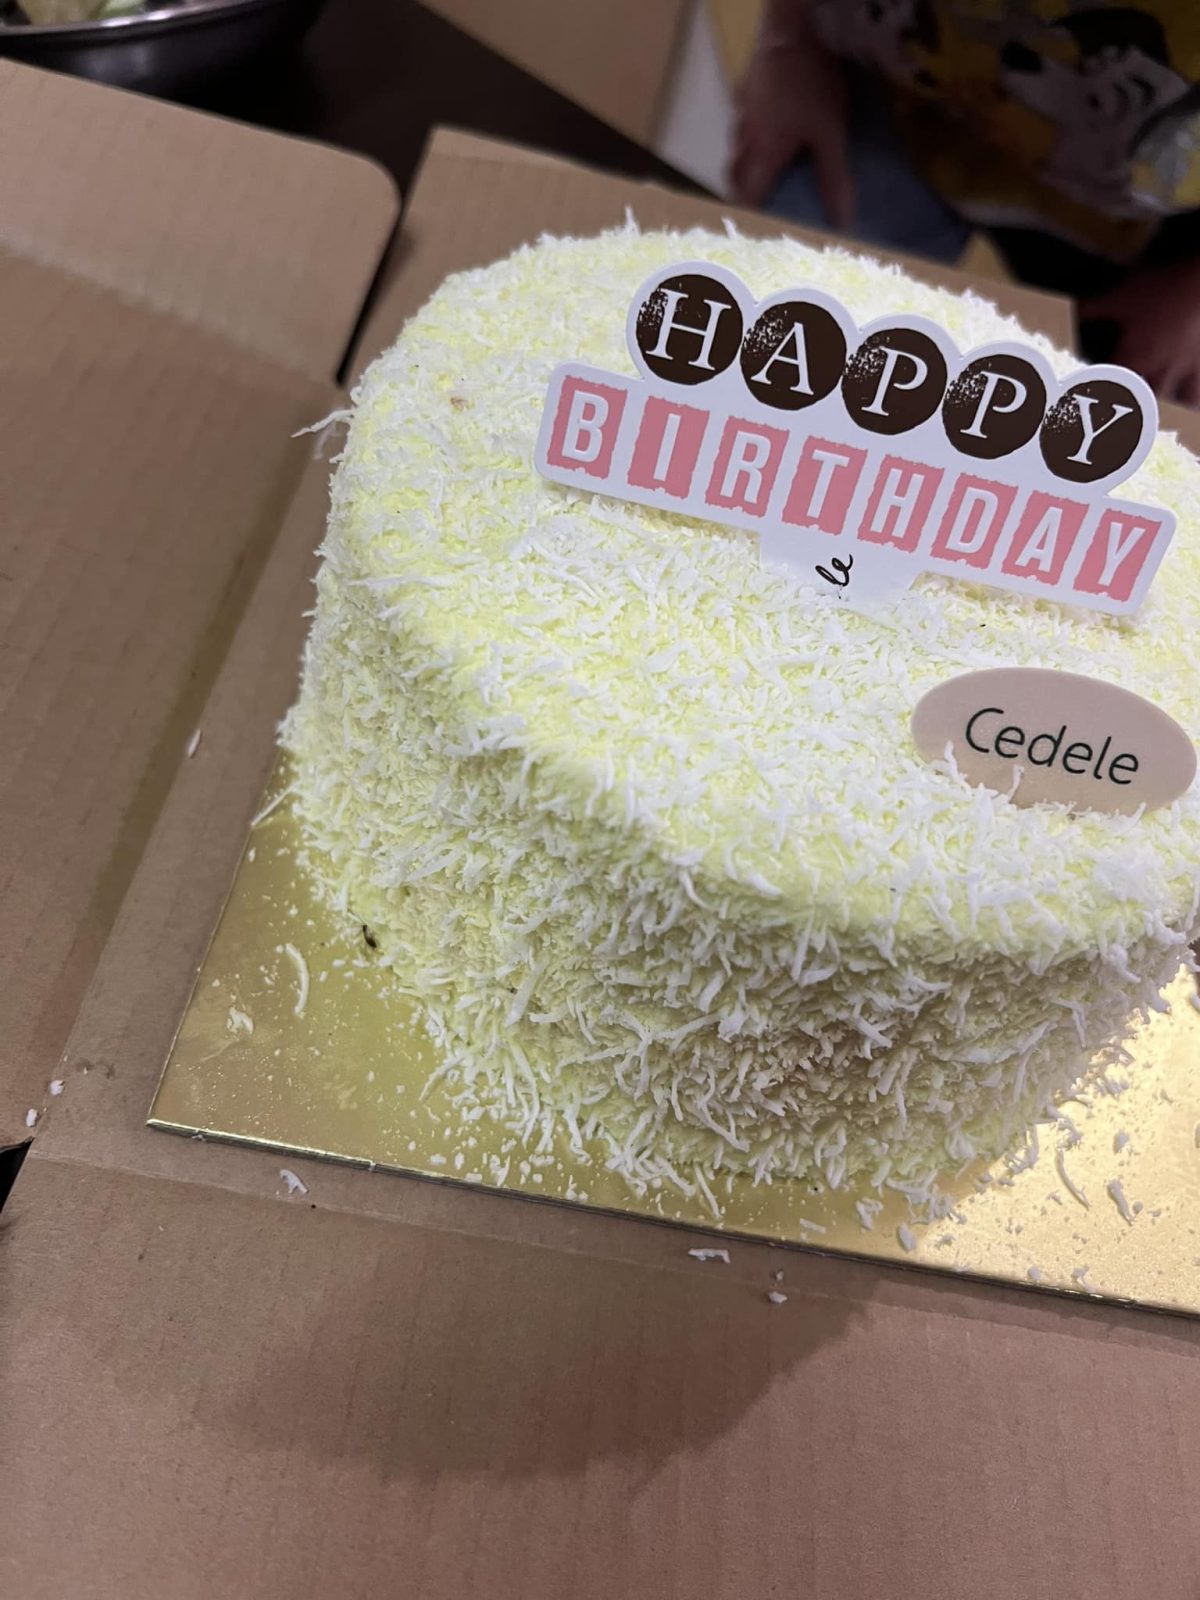 Customer finds live cockroach in cake from Cedele Waterway Point, bakery apologises